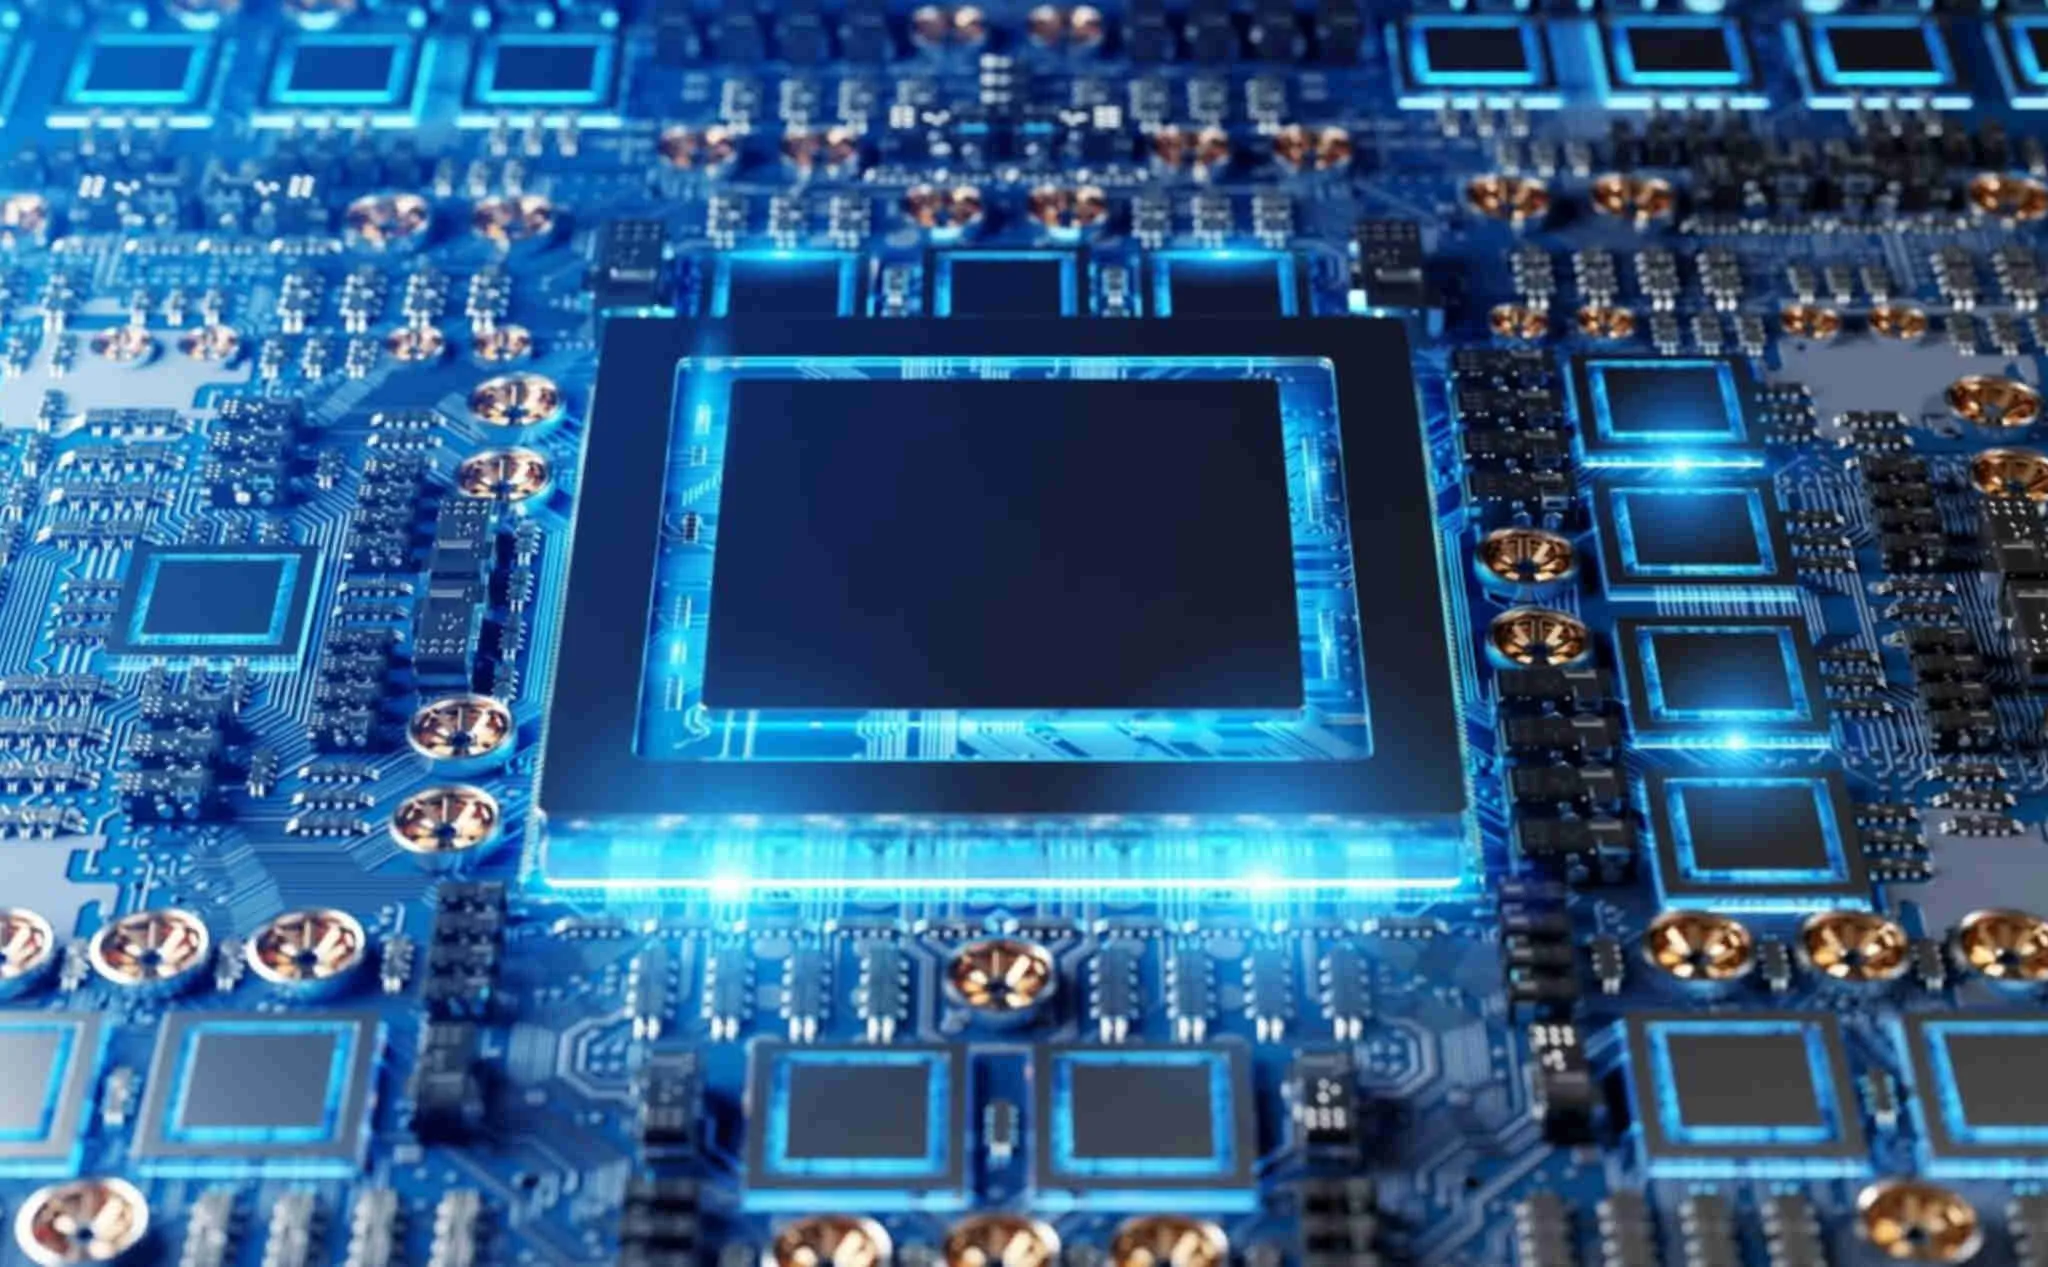 A universal processor has been developed that can be upgraded